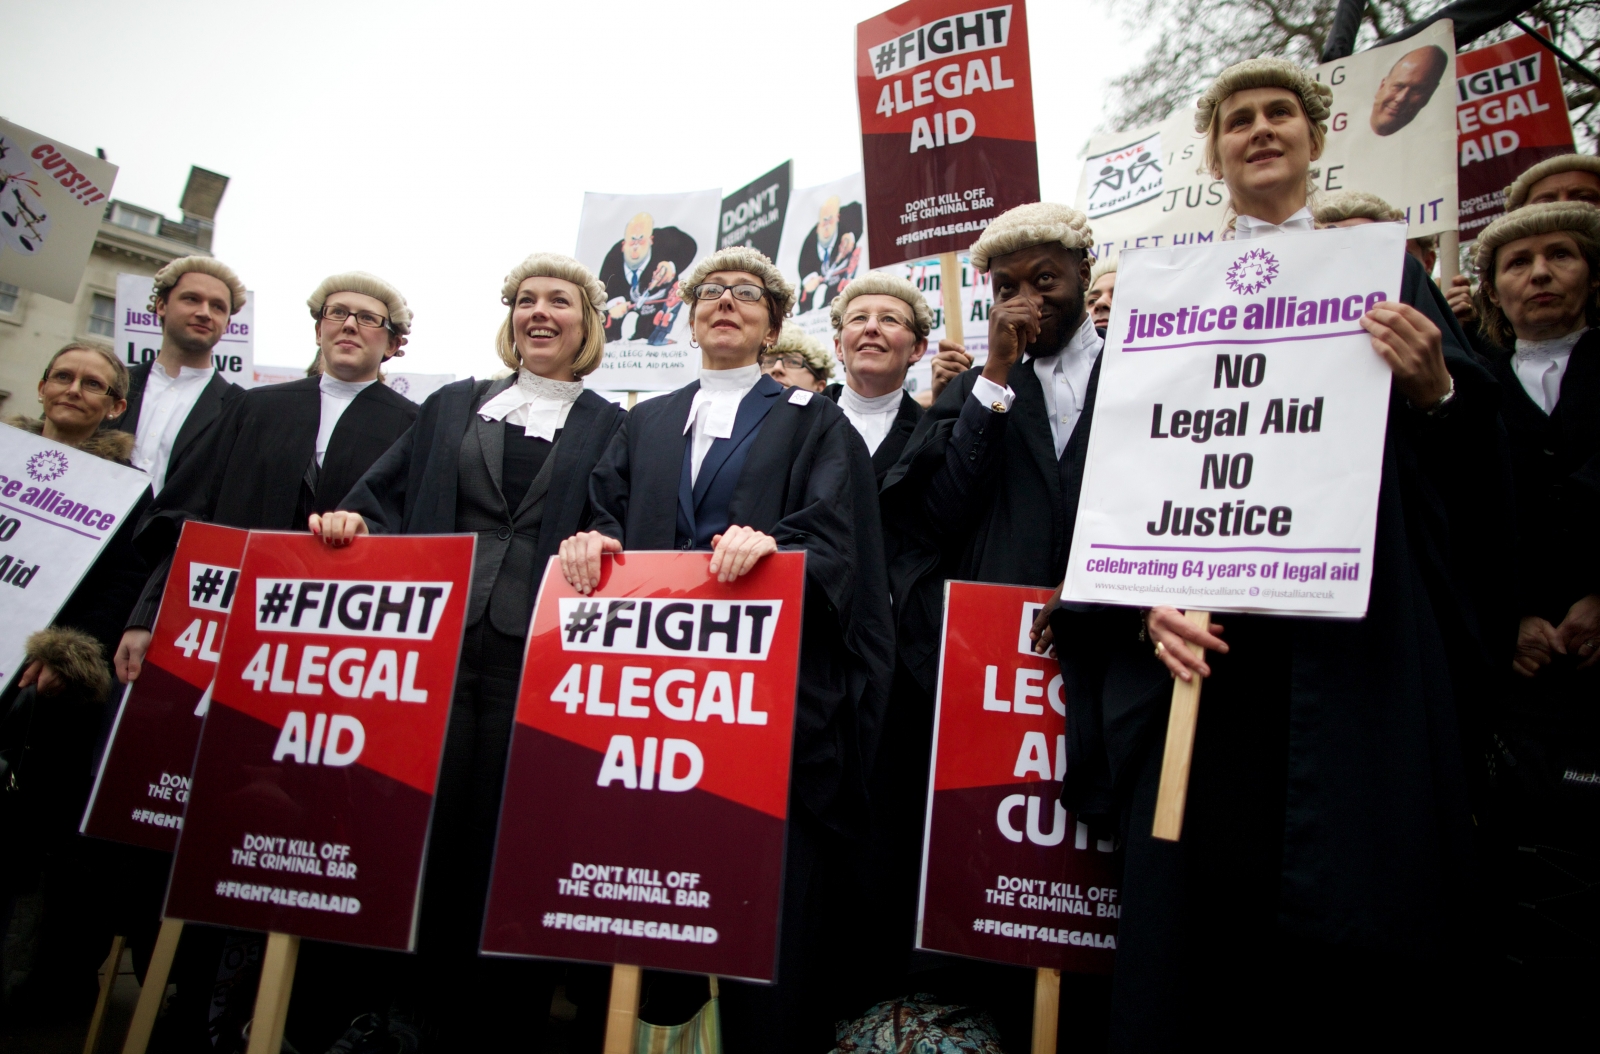 Criminal Barristers To Strike Across England And Wales In Legal Aid